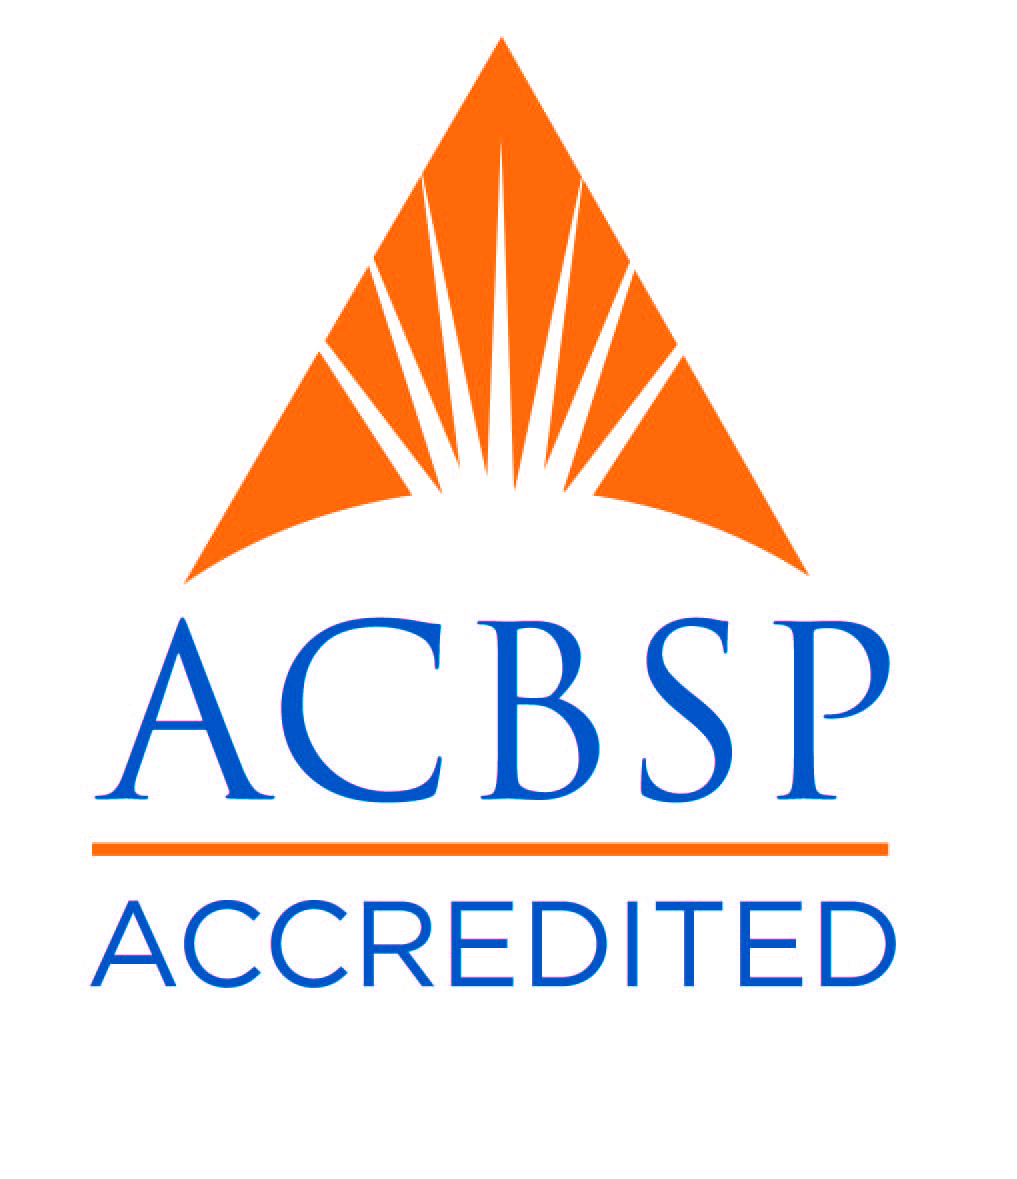 LCC School of Business Programs are Accredited by the Accreditation Council for Business Schools and Programs (ACBSP)